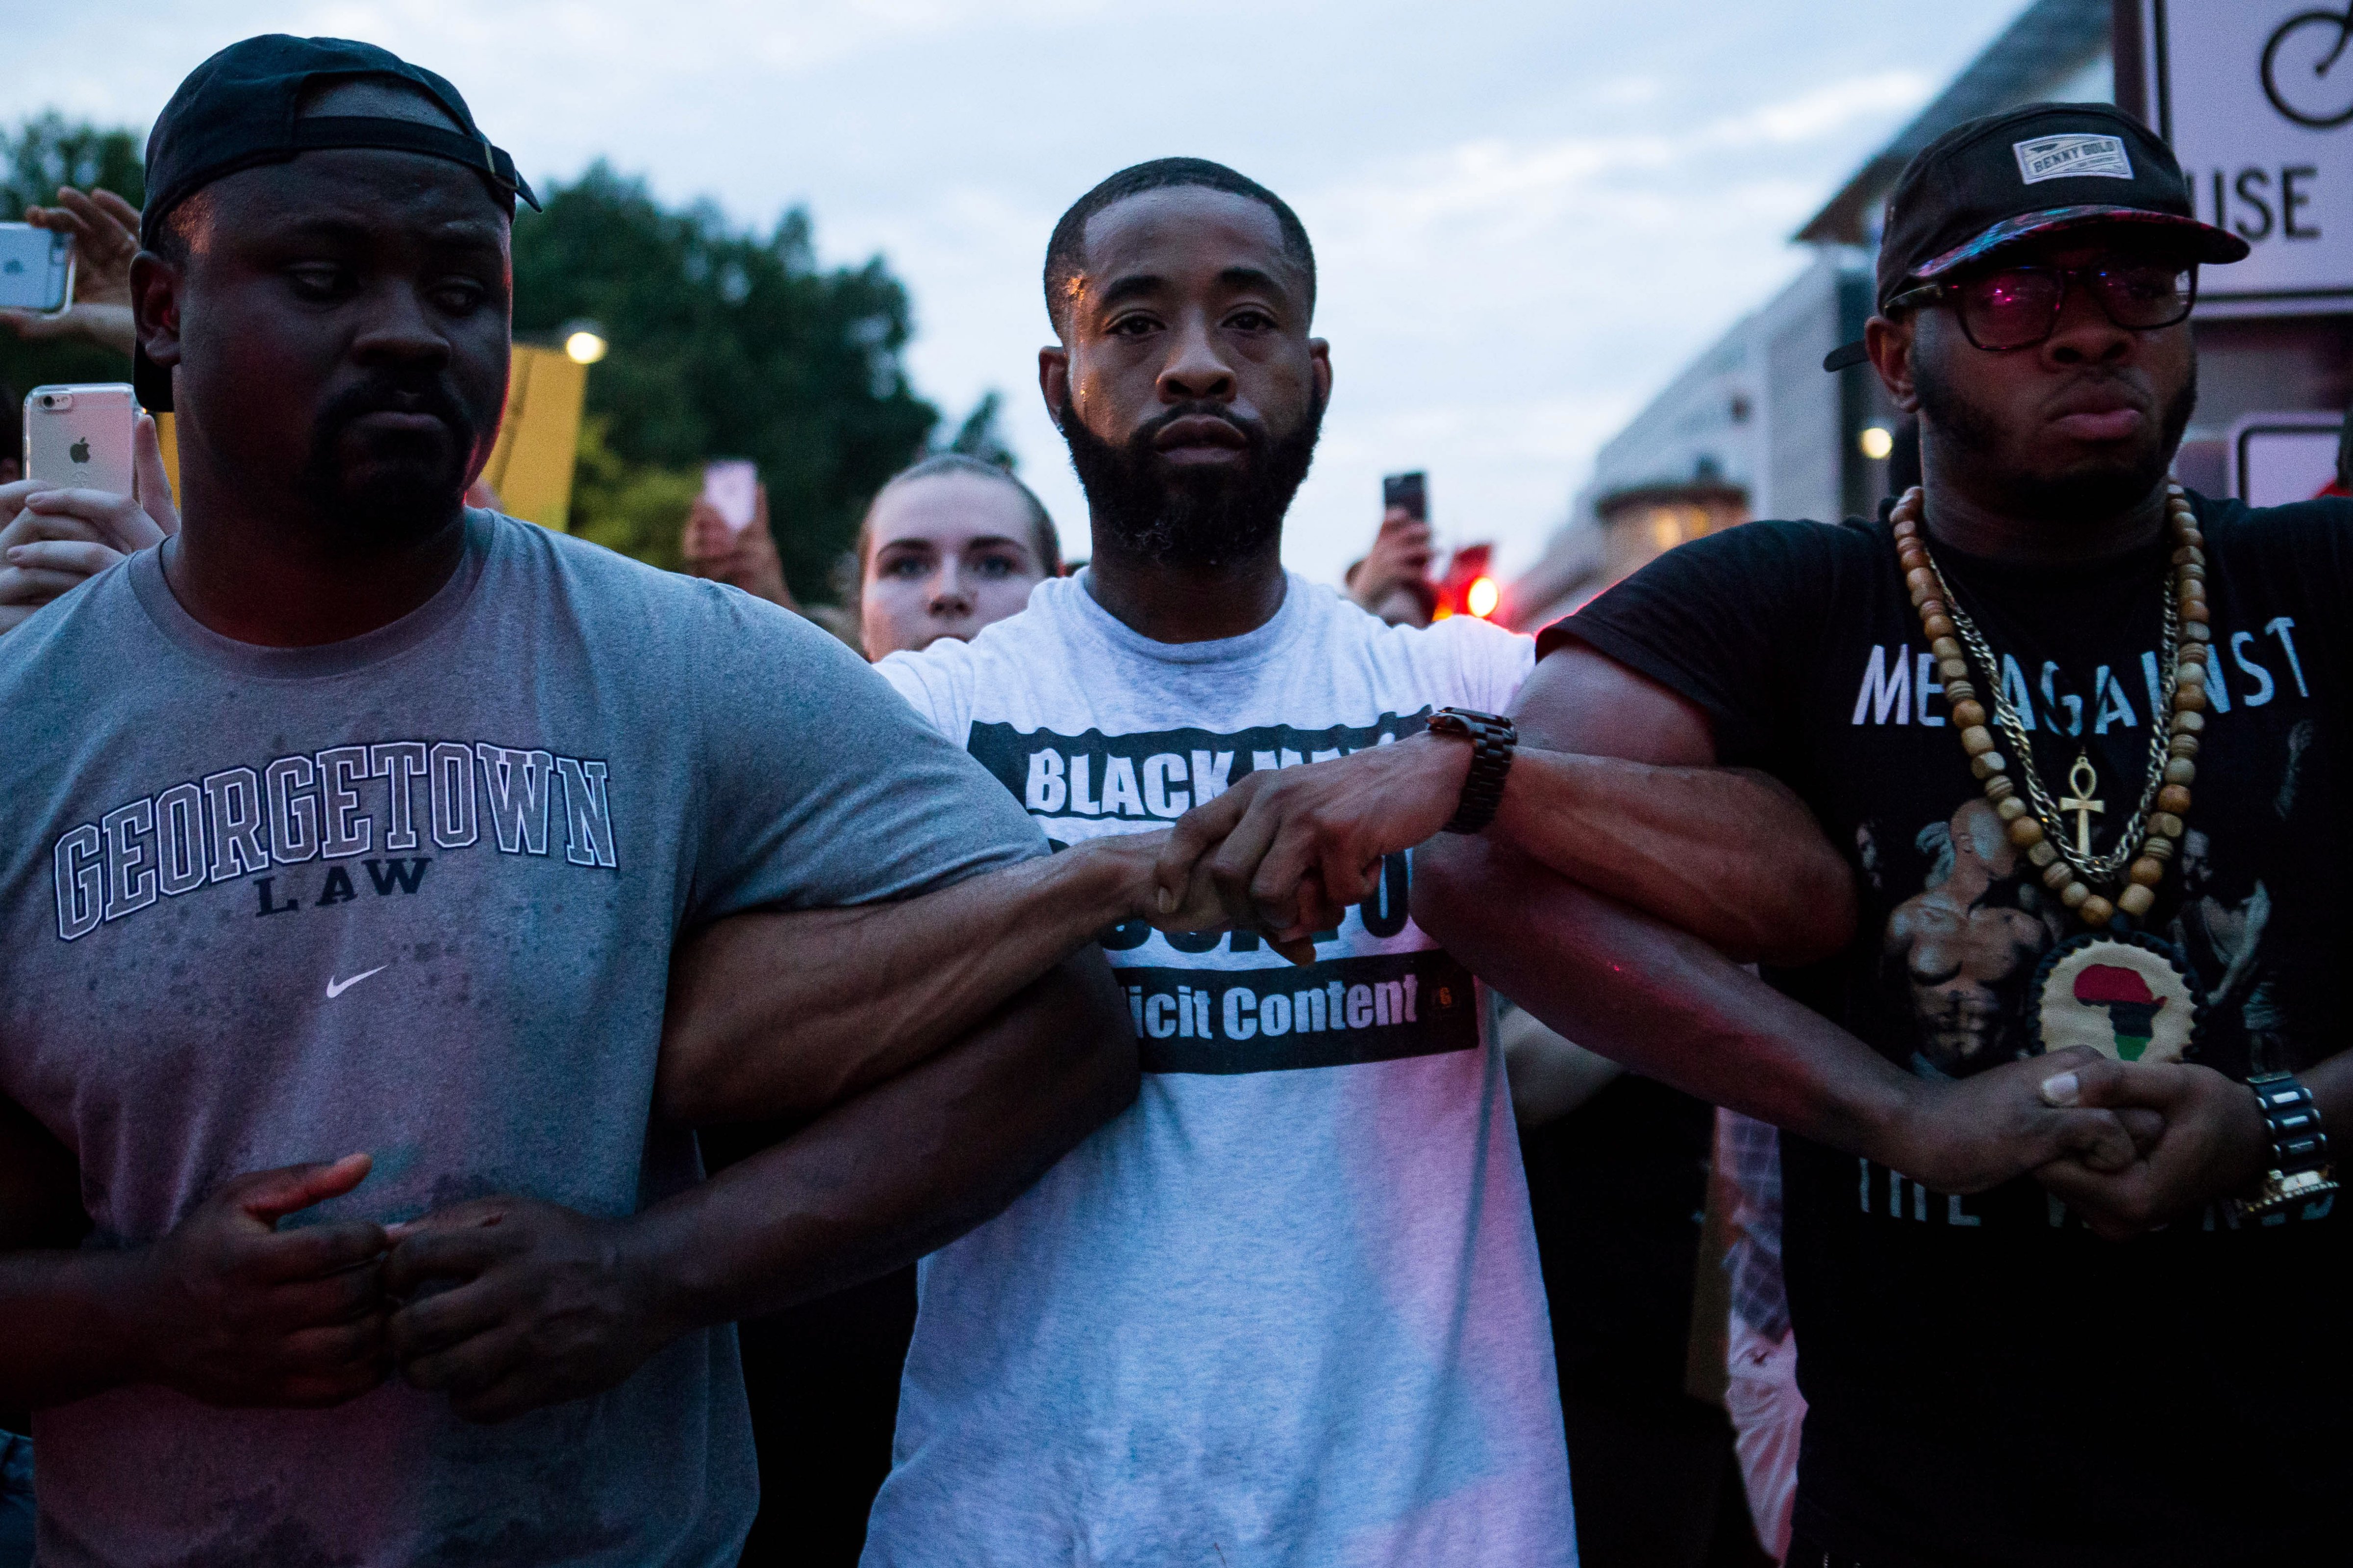 Demonstrators lock arms as they march from The White House on July 7, 2016, to protest the fatal police shootings of Alton Sterling and Philando Castile. (Zach Gibson—Getty Images)